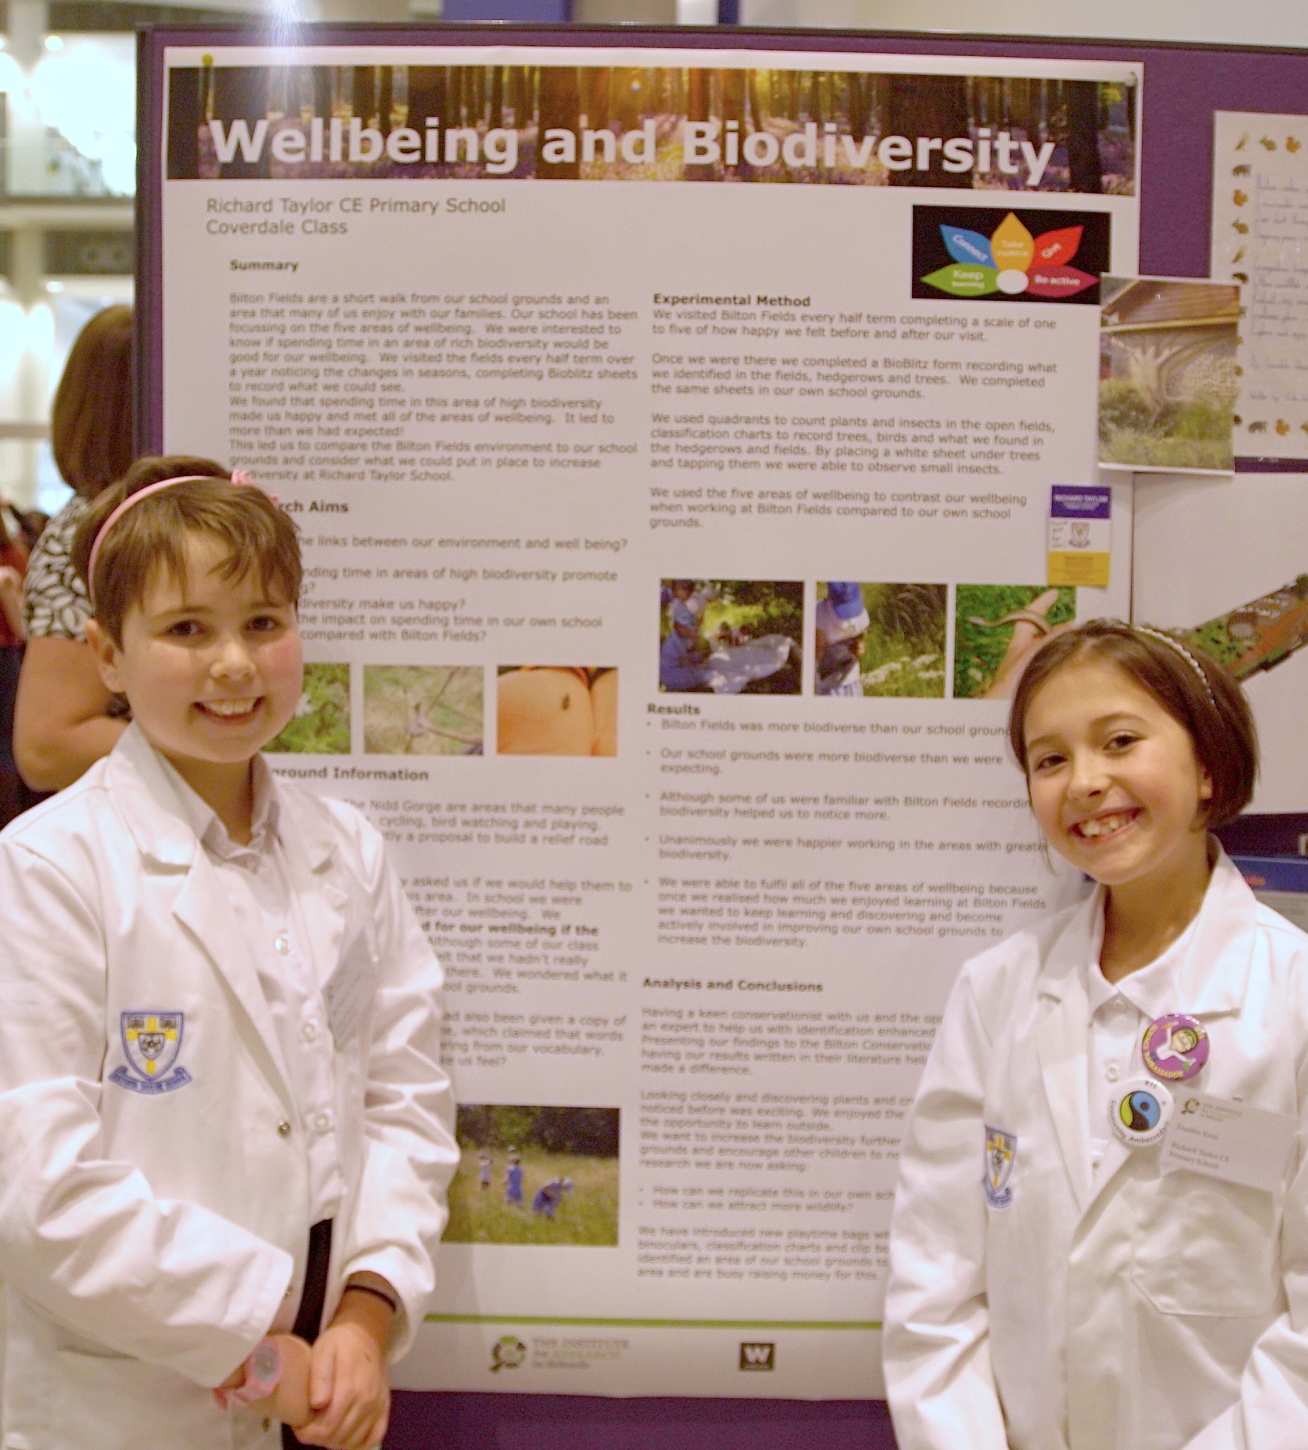 Photo of two children in lab coats presenting their work in front of a poster titled "Wellbeing and Biodiversity"